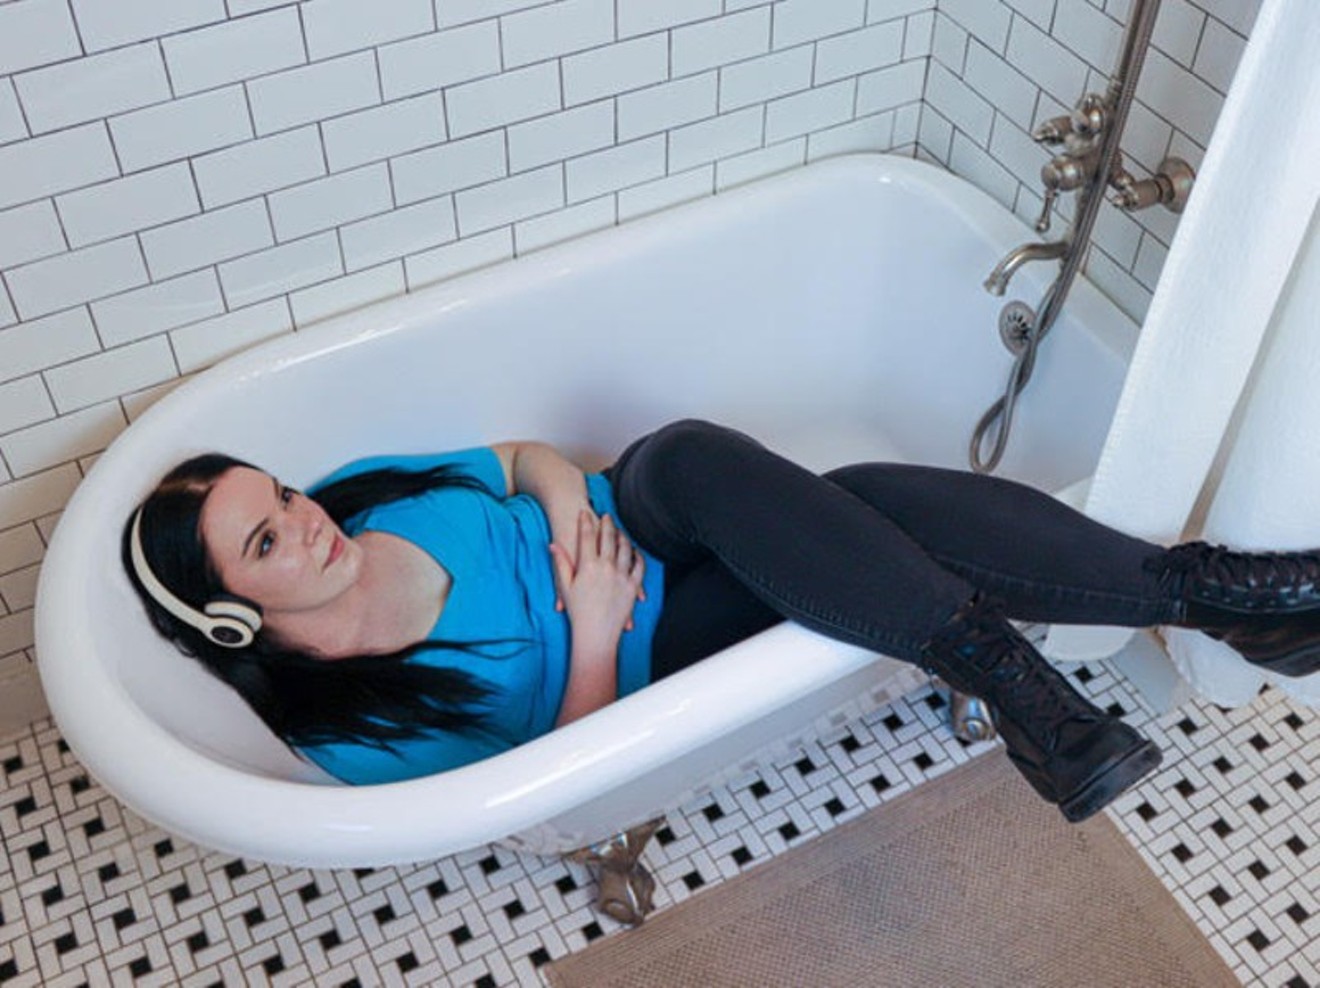 Your bathtub is just one of the places you'll be asked to listen to What Happened Here